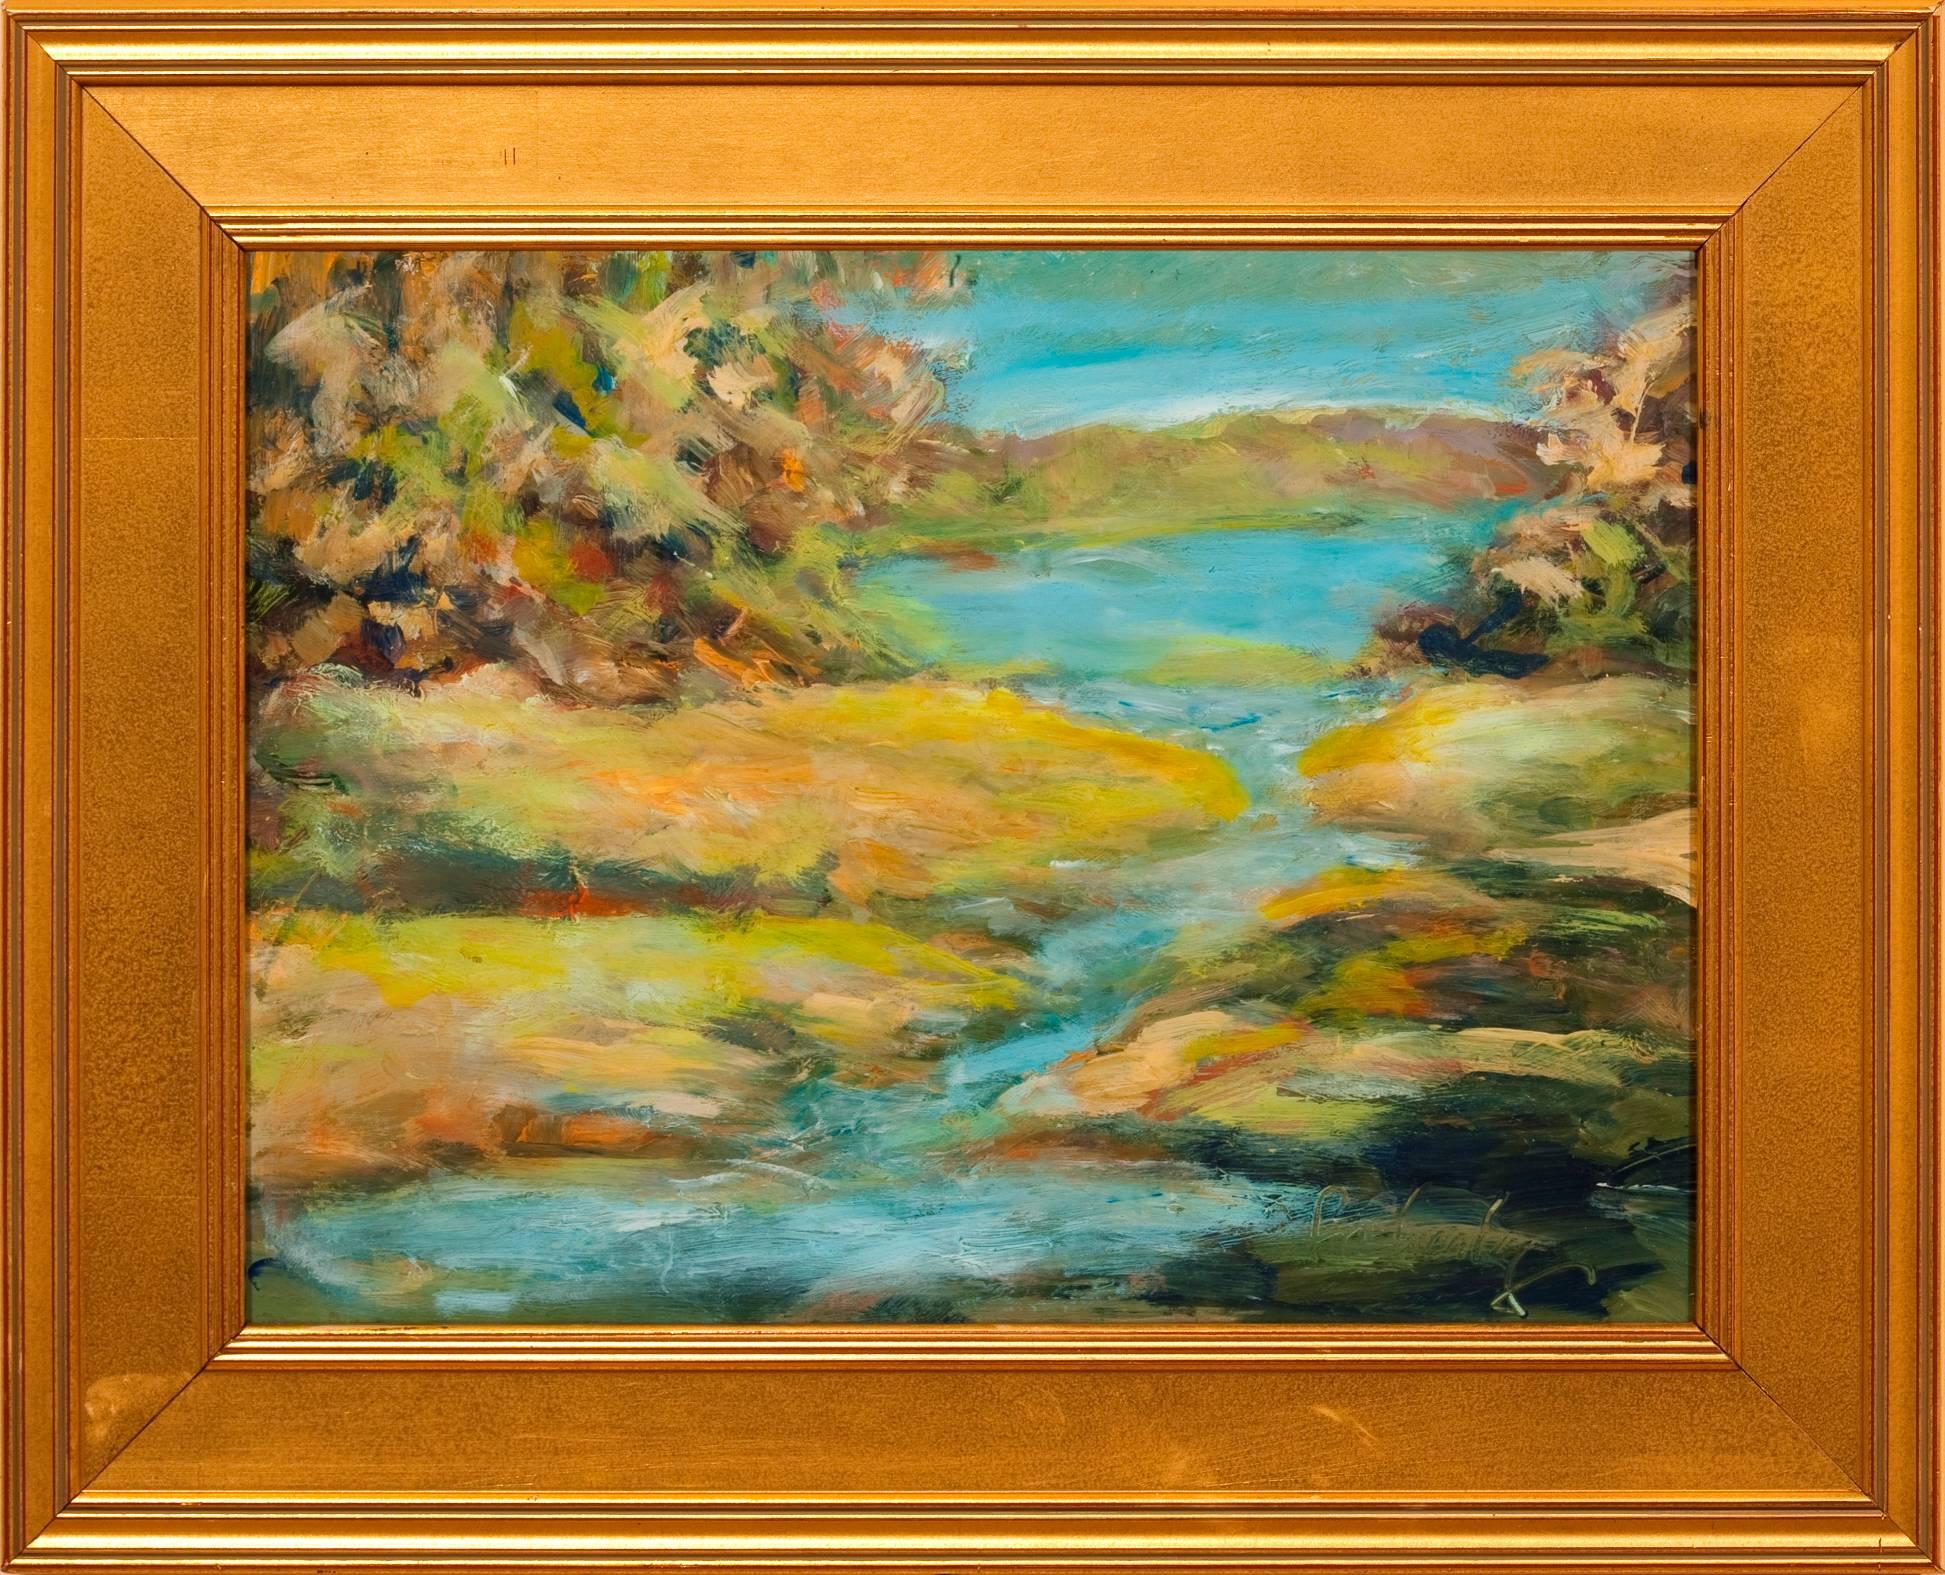 Evelyn Faherty Landscape Painting - "Mouth of the Delaware"